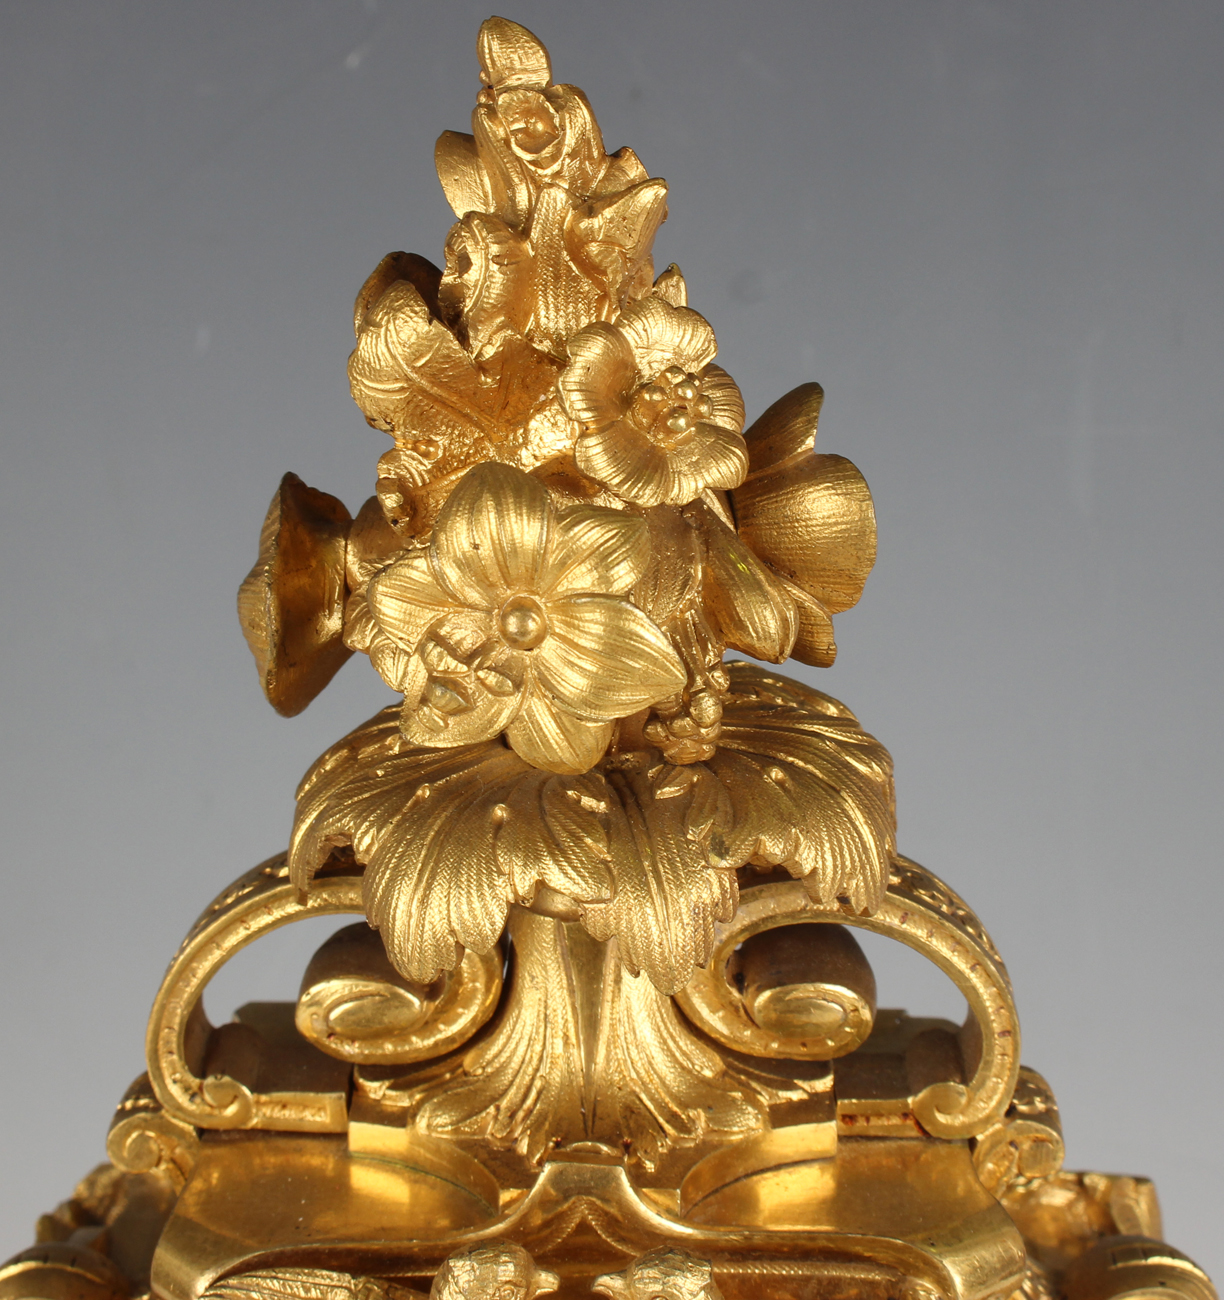 A late 19th century French ormolu and Sèvres style porcelain mantel clock with eight day movement - Image 13 of 14